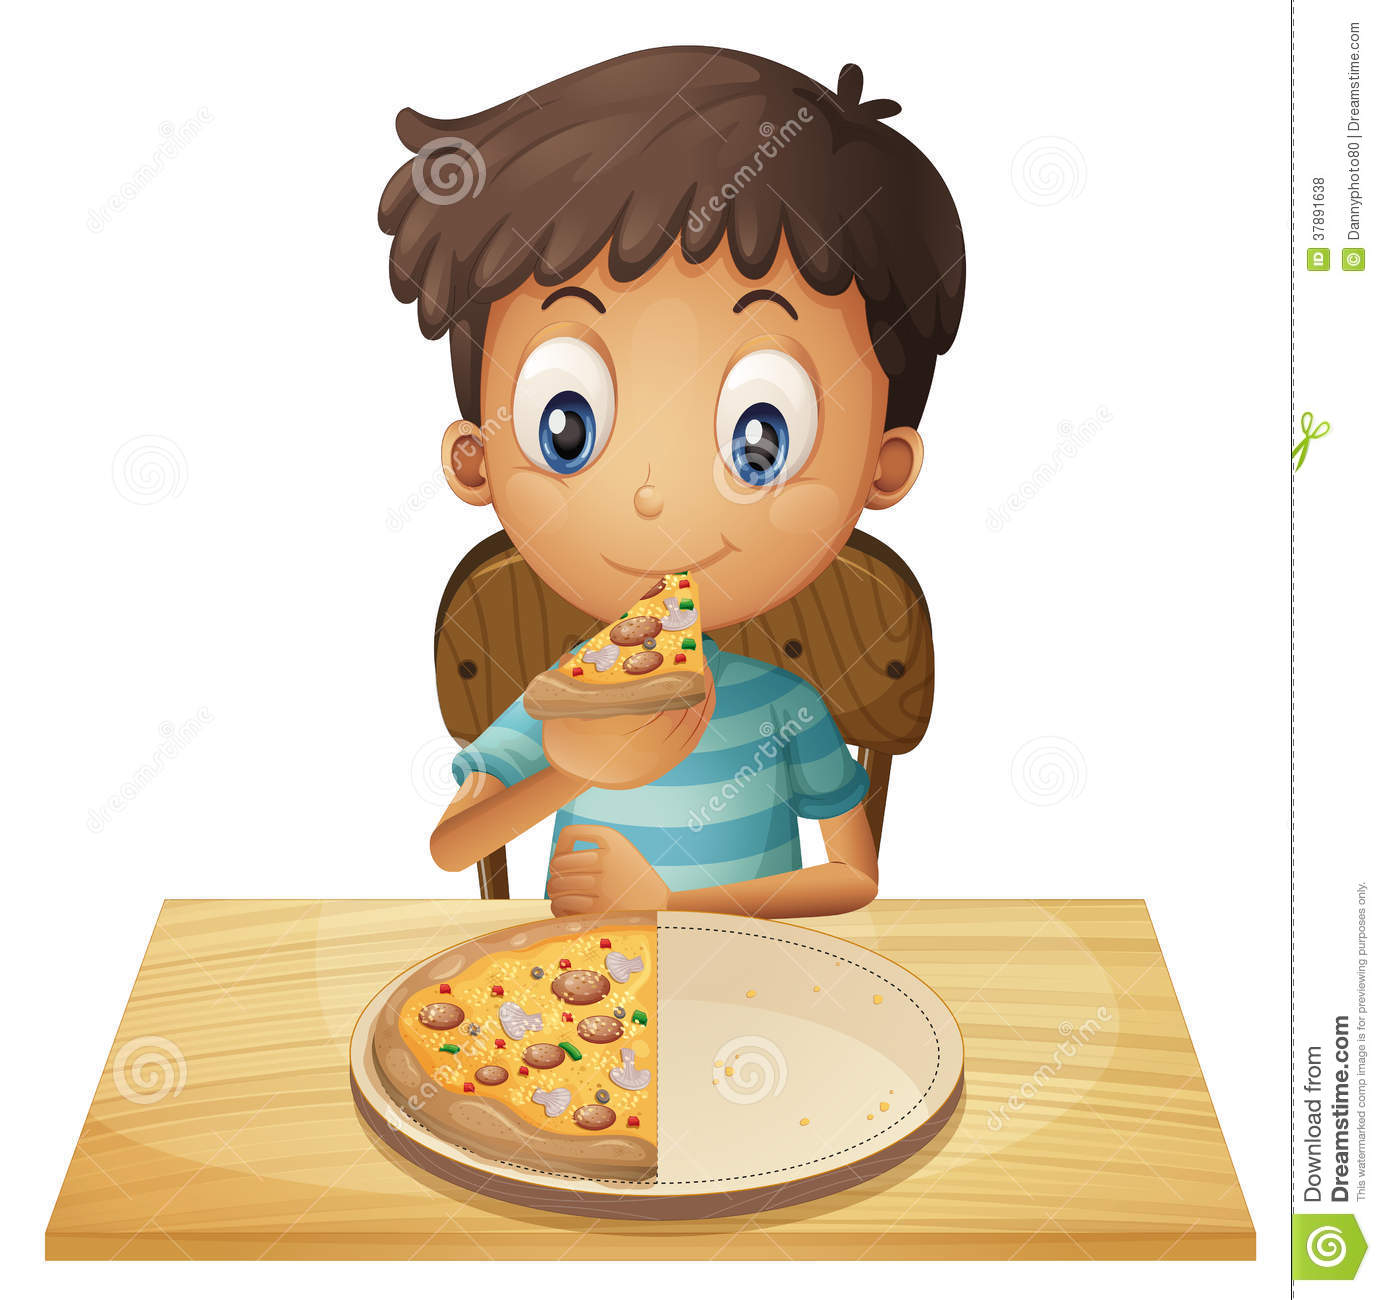 Young Boy Eating Pizza Royalty Free Stock Photos   Image  37891638